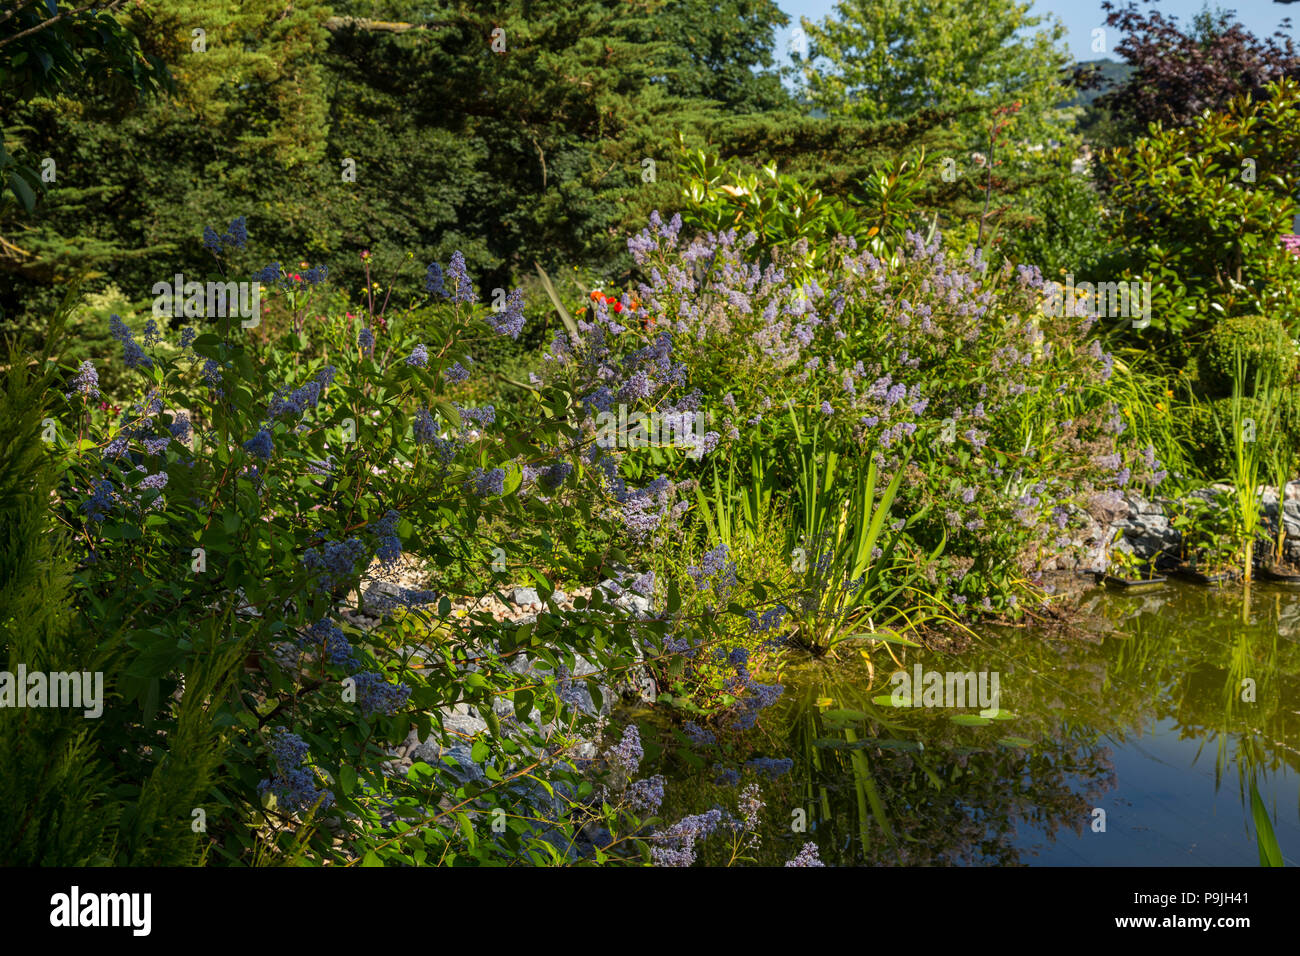 Garden pond with fishing line strung above to deter herons, surrounded by Ceanothus x delileanus 'Gloire de Versailles' Stock Photo